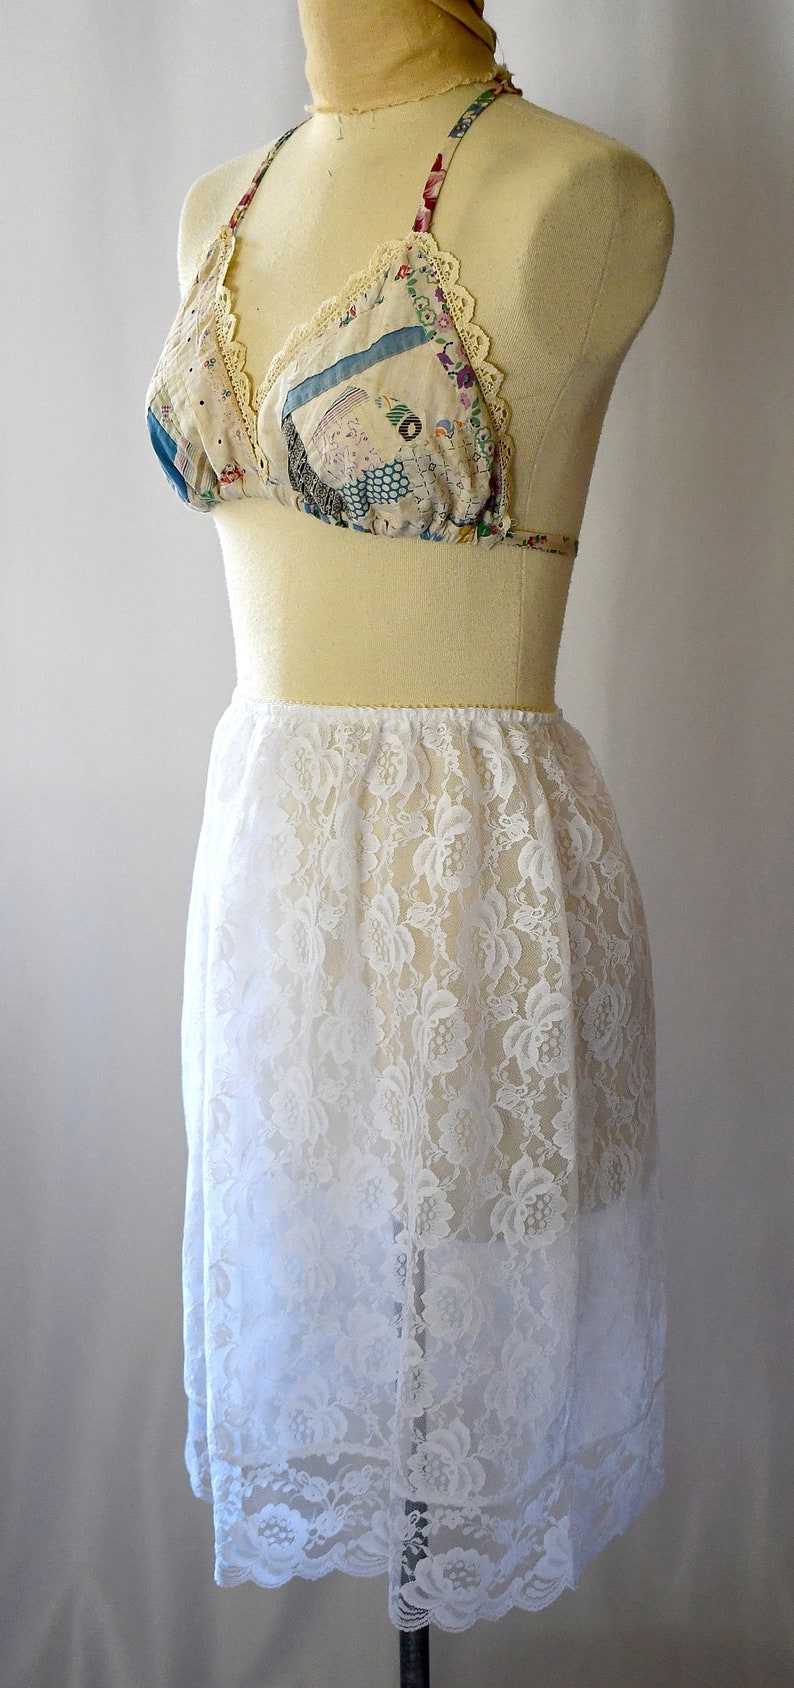 Vintage 1970s White Lace Half Slip Waist 24 to 32 Inches | Etsy